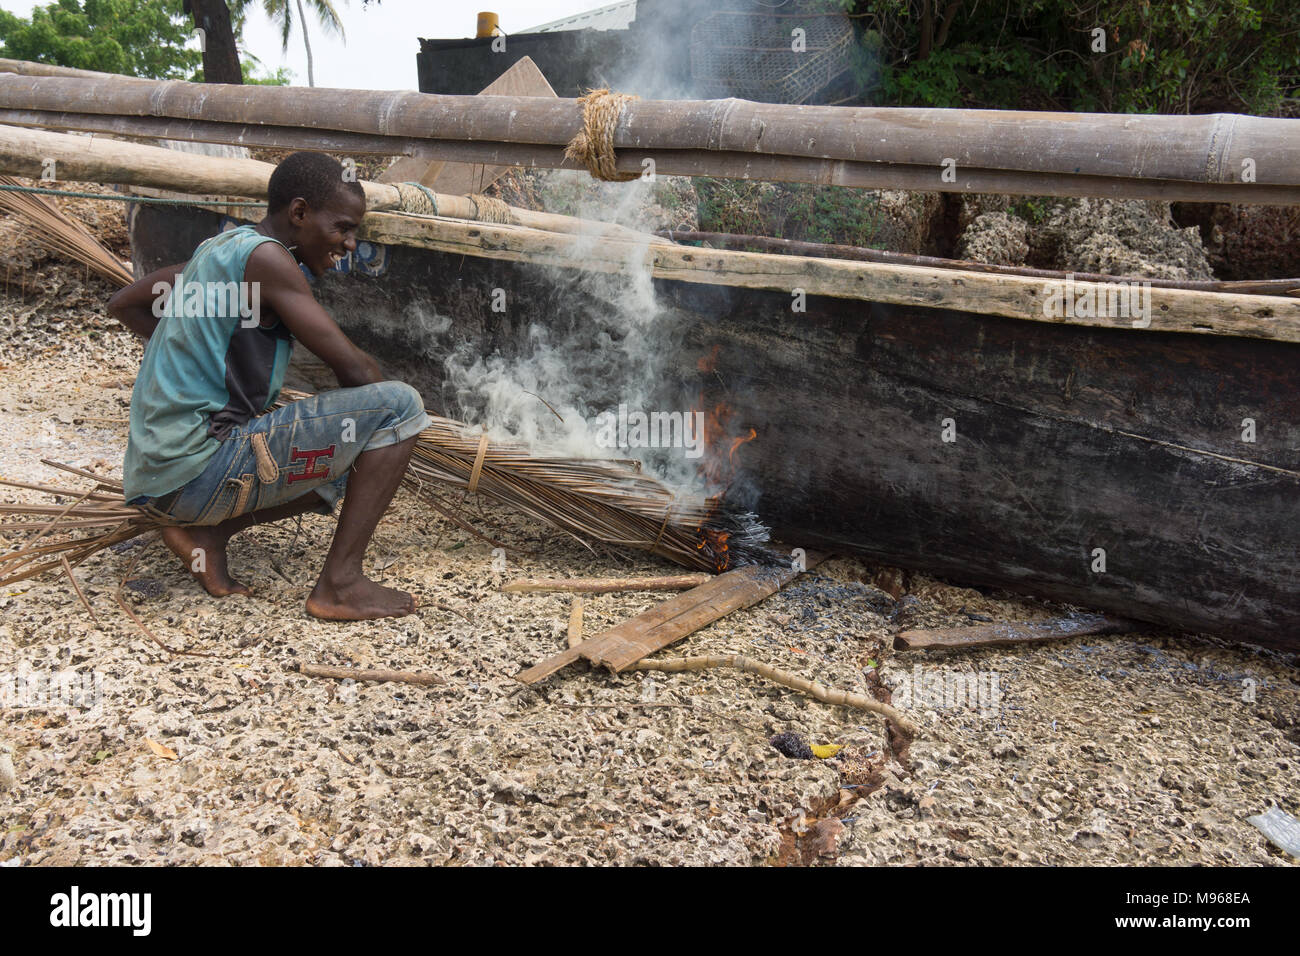 A boat builder using traditional methods burning a wooden dug out boat to seal it and make it water tight on Zanzibar island Stock Photo